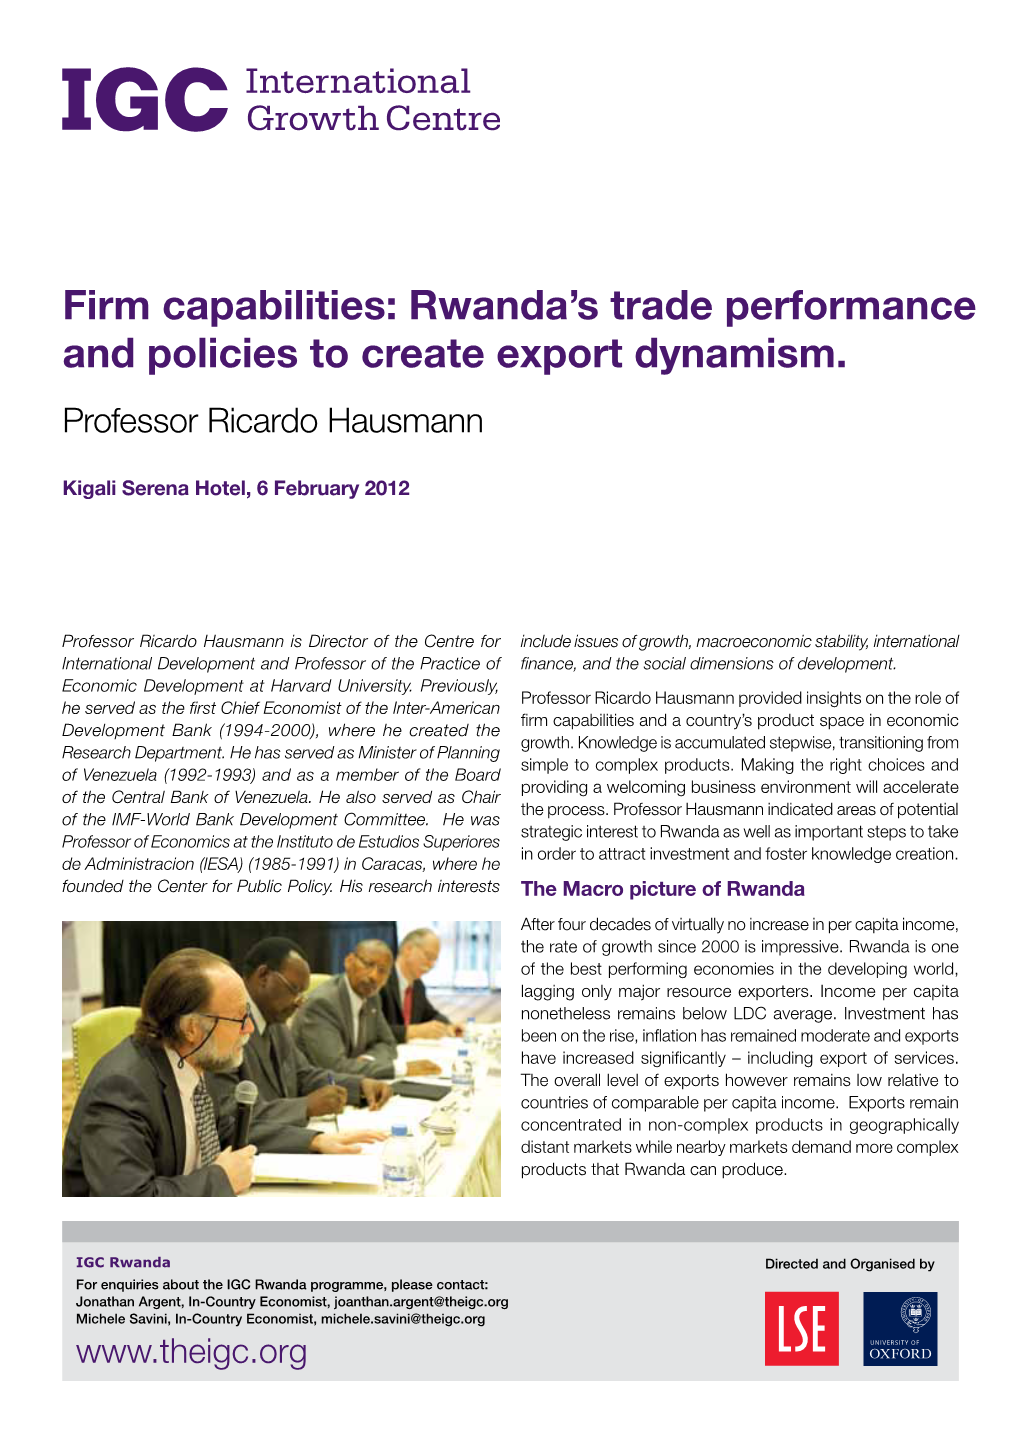 Firm Capabilities: Rwanda's Trade Performance and Policies to Create Export Dynamism